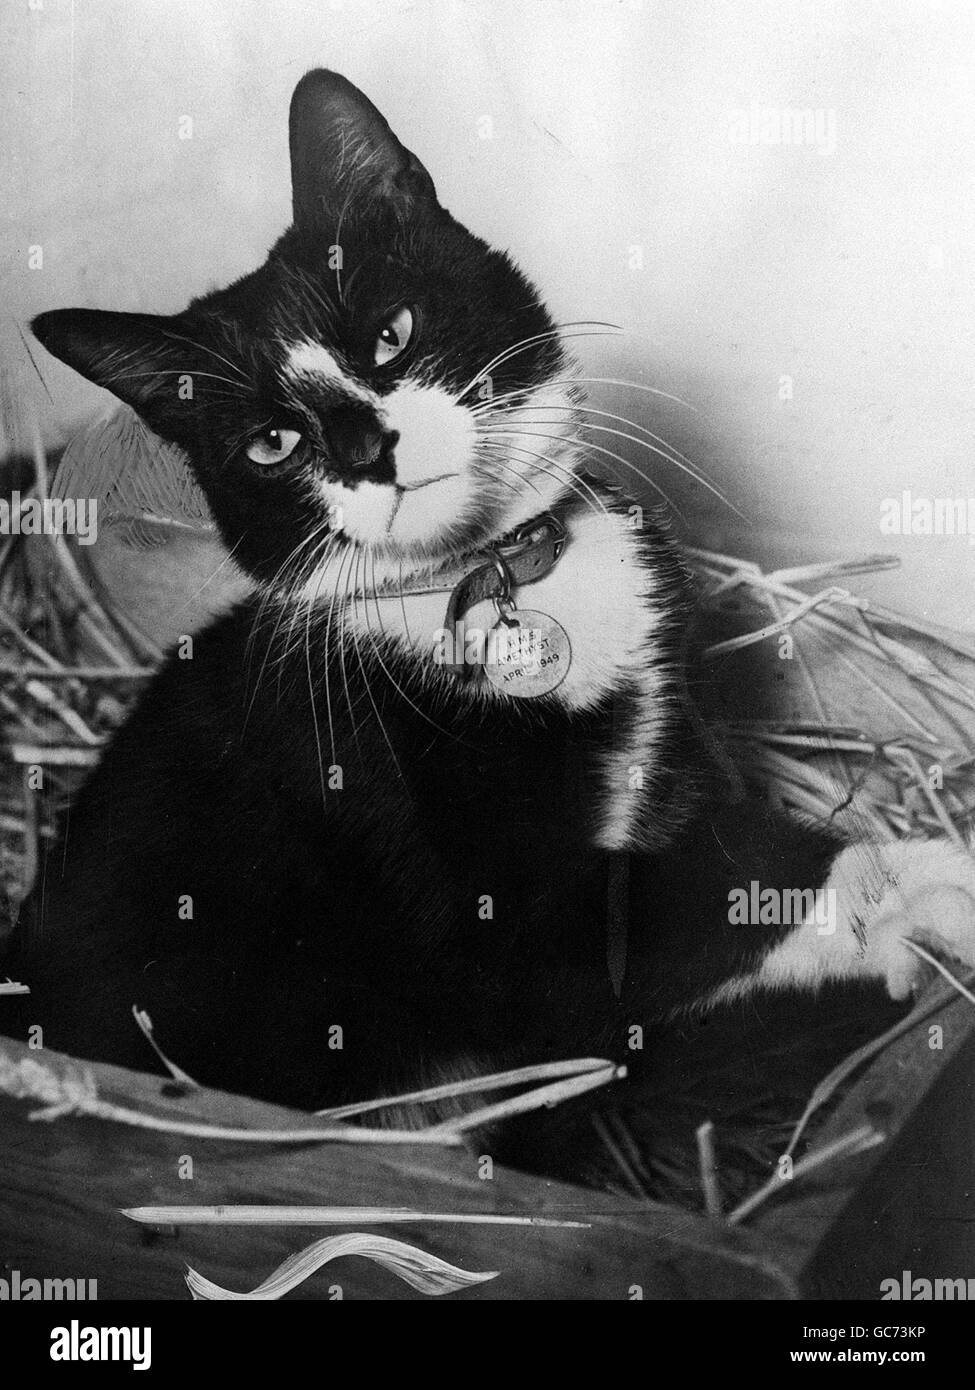 SIMON, THE SHIP'S CAT OF THE FRIGATE AMETHYST, WITH THE DICKEN MEDAL WHICH HE WON IN 1949 FOR DEVOTION TO RAT-KILLLING ONBOARD THE SHIP. SIMON'S MEDAL, THE ONE EVER AWARDED TO A CAT, GOES UNDER HAMMER AT CHRISTIE'S. Stock Photo